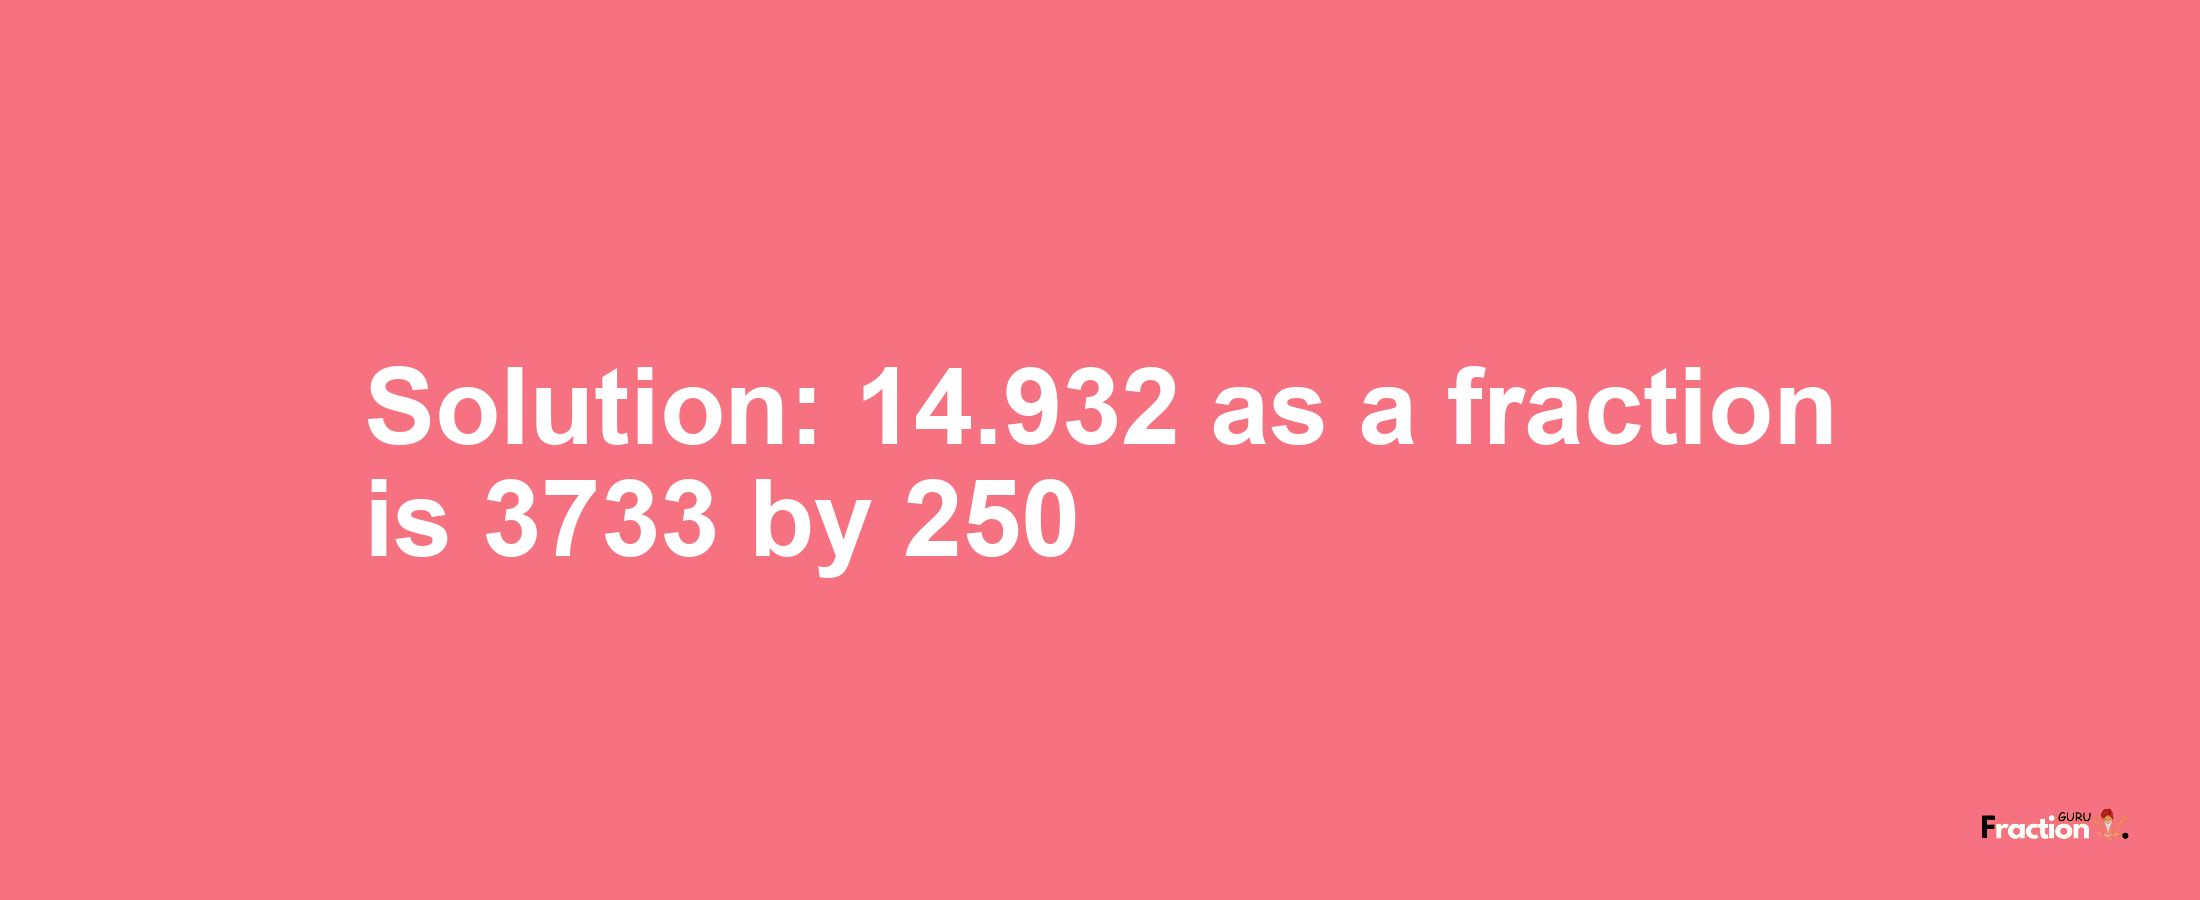 Solution:14.932 as a fraction is 3733/250